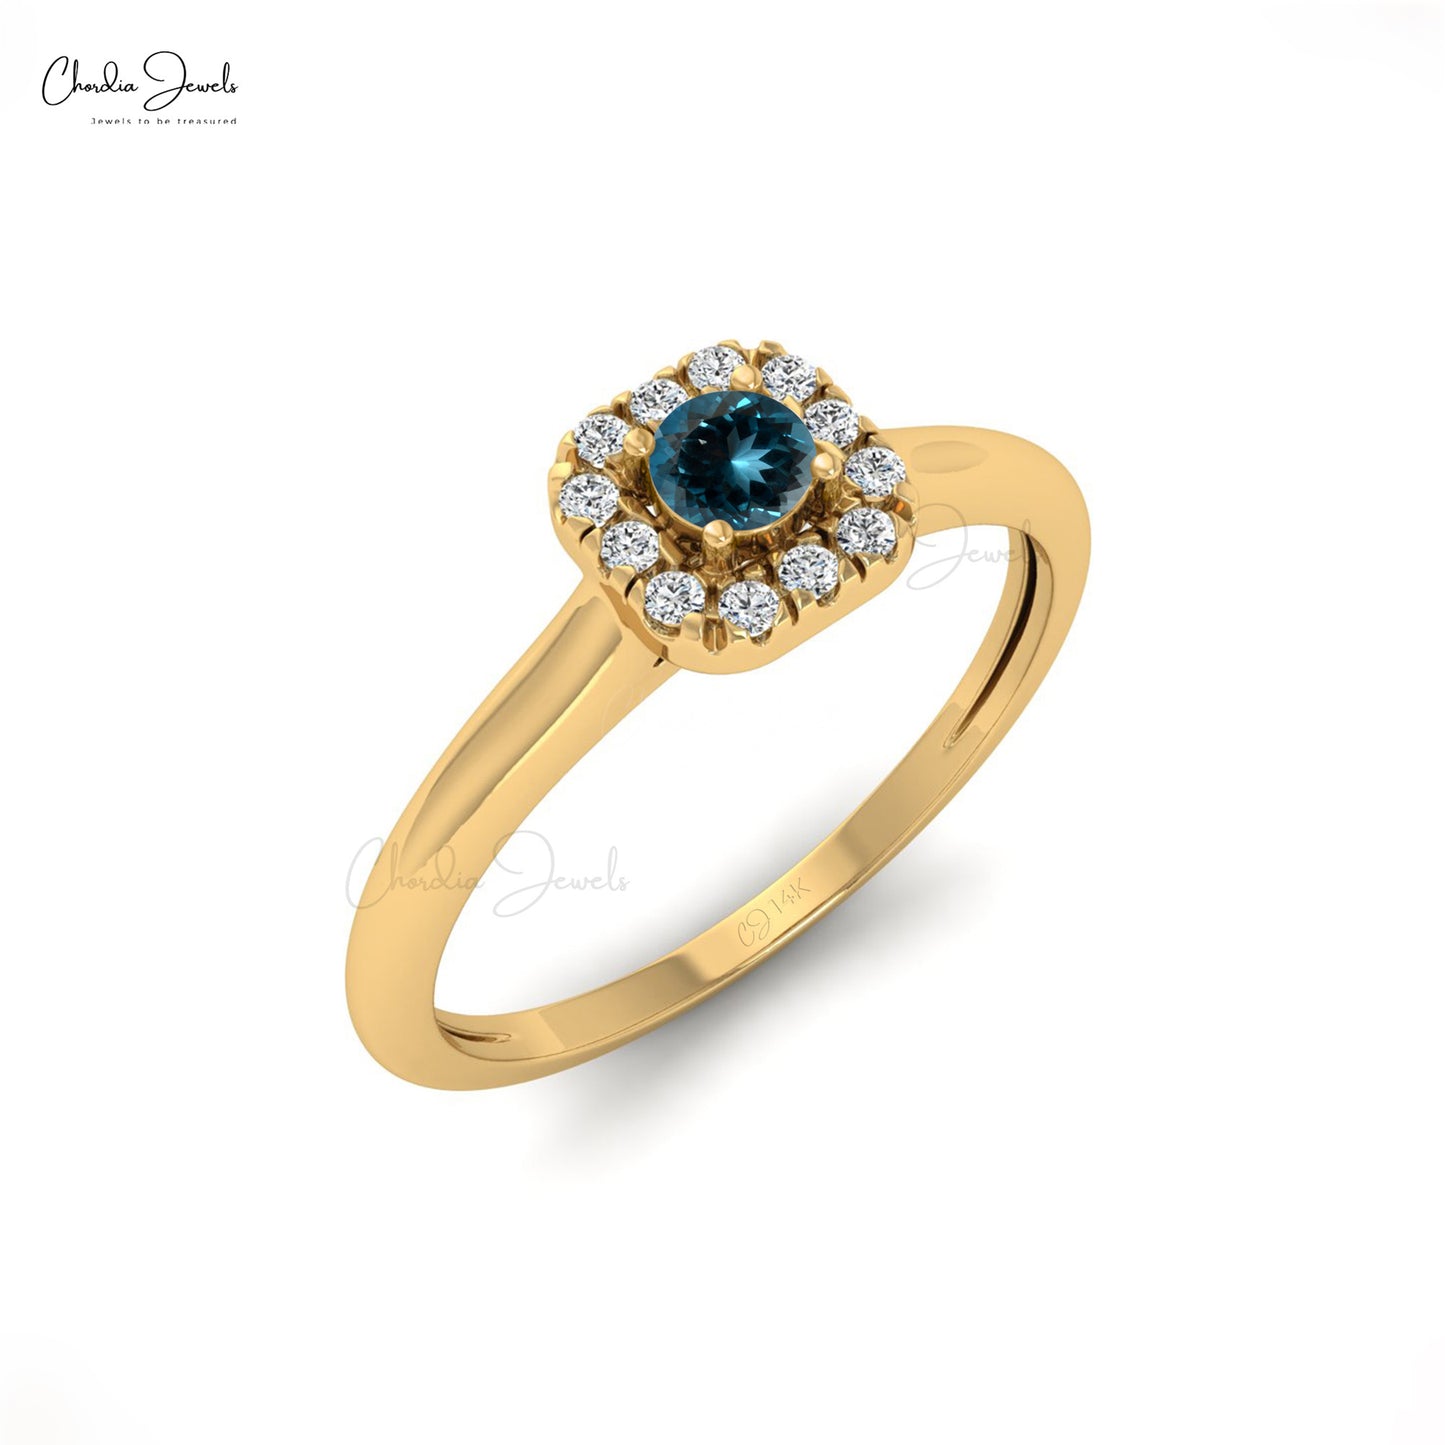 Natural 3mm Round Cut London Blue Topaz and Diamond Halo Ring, 14k Solid Gold Gemstone Dainty Ring For Anniversary Gift